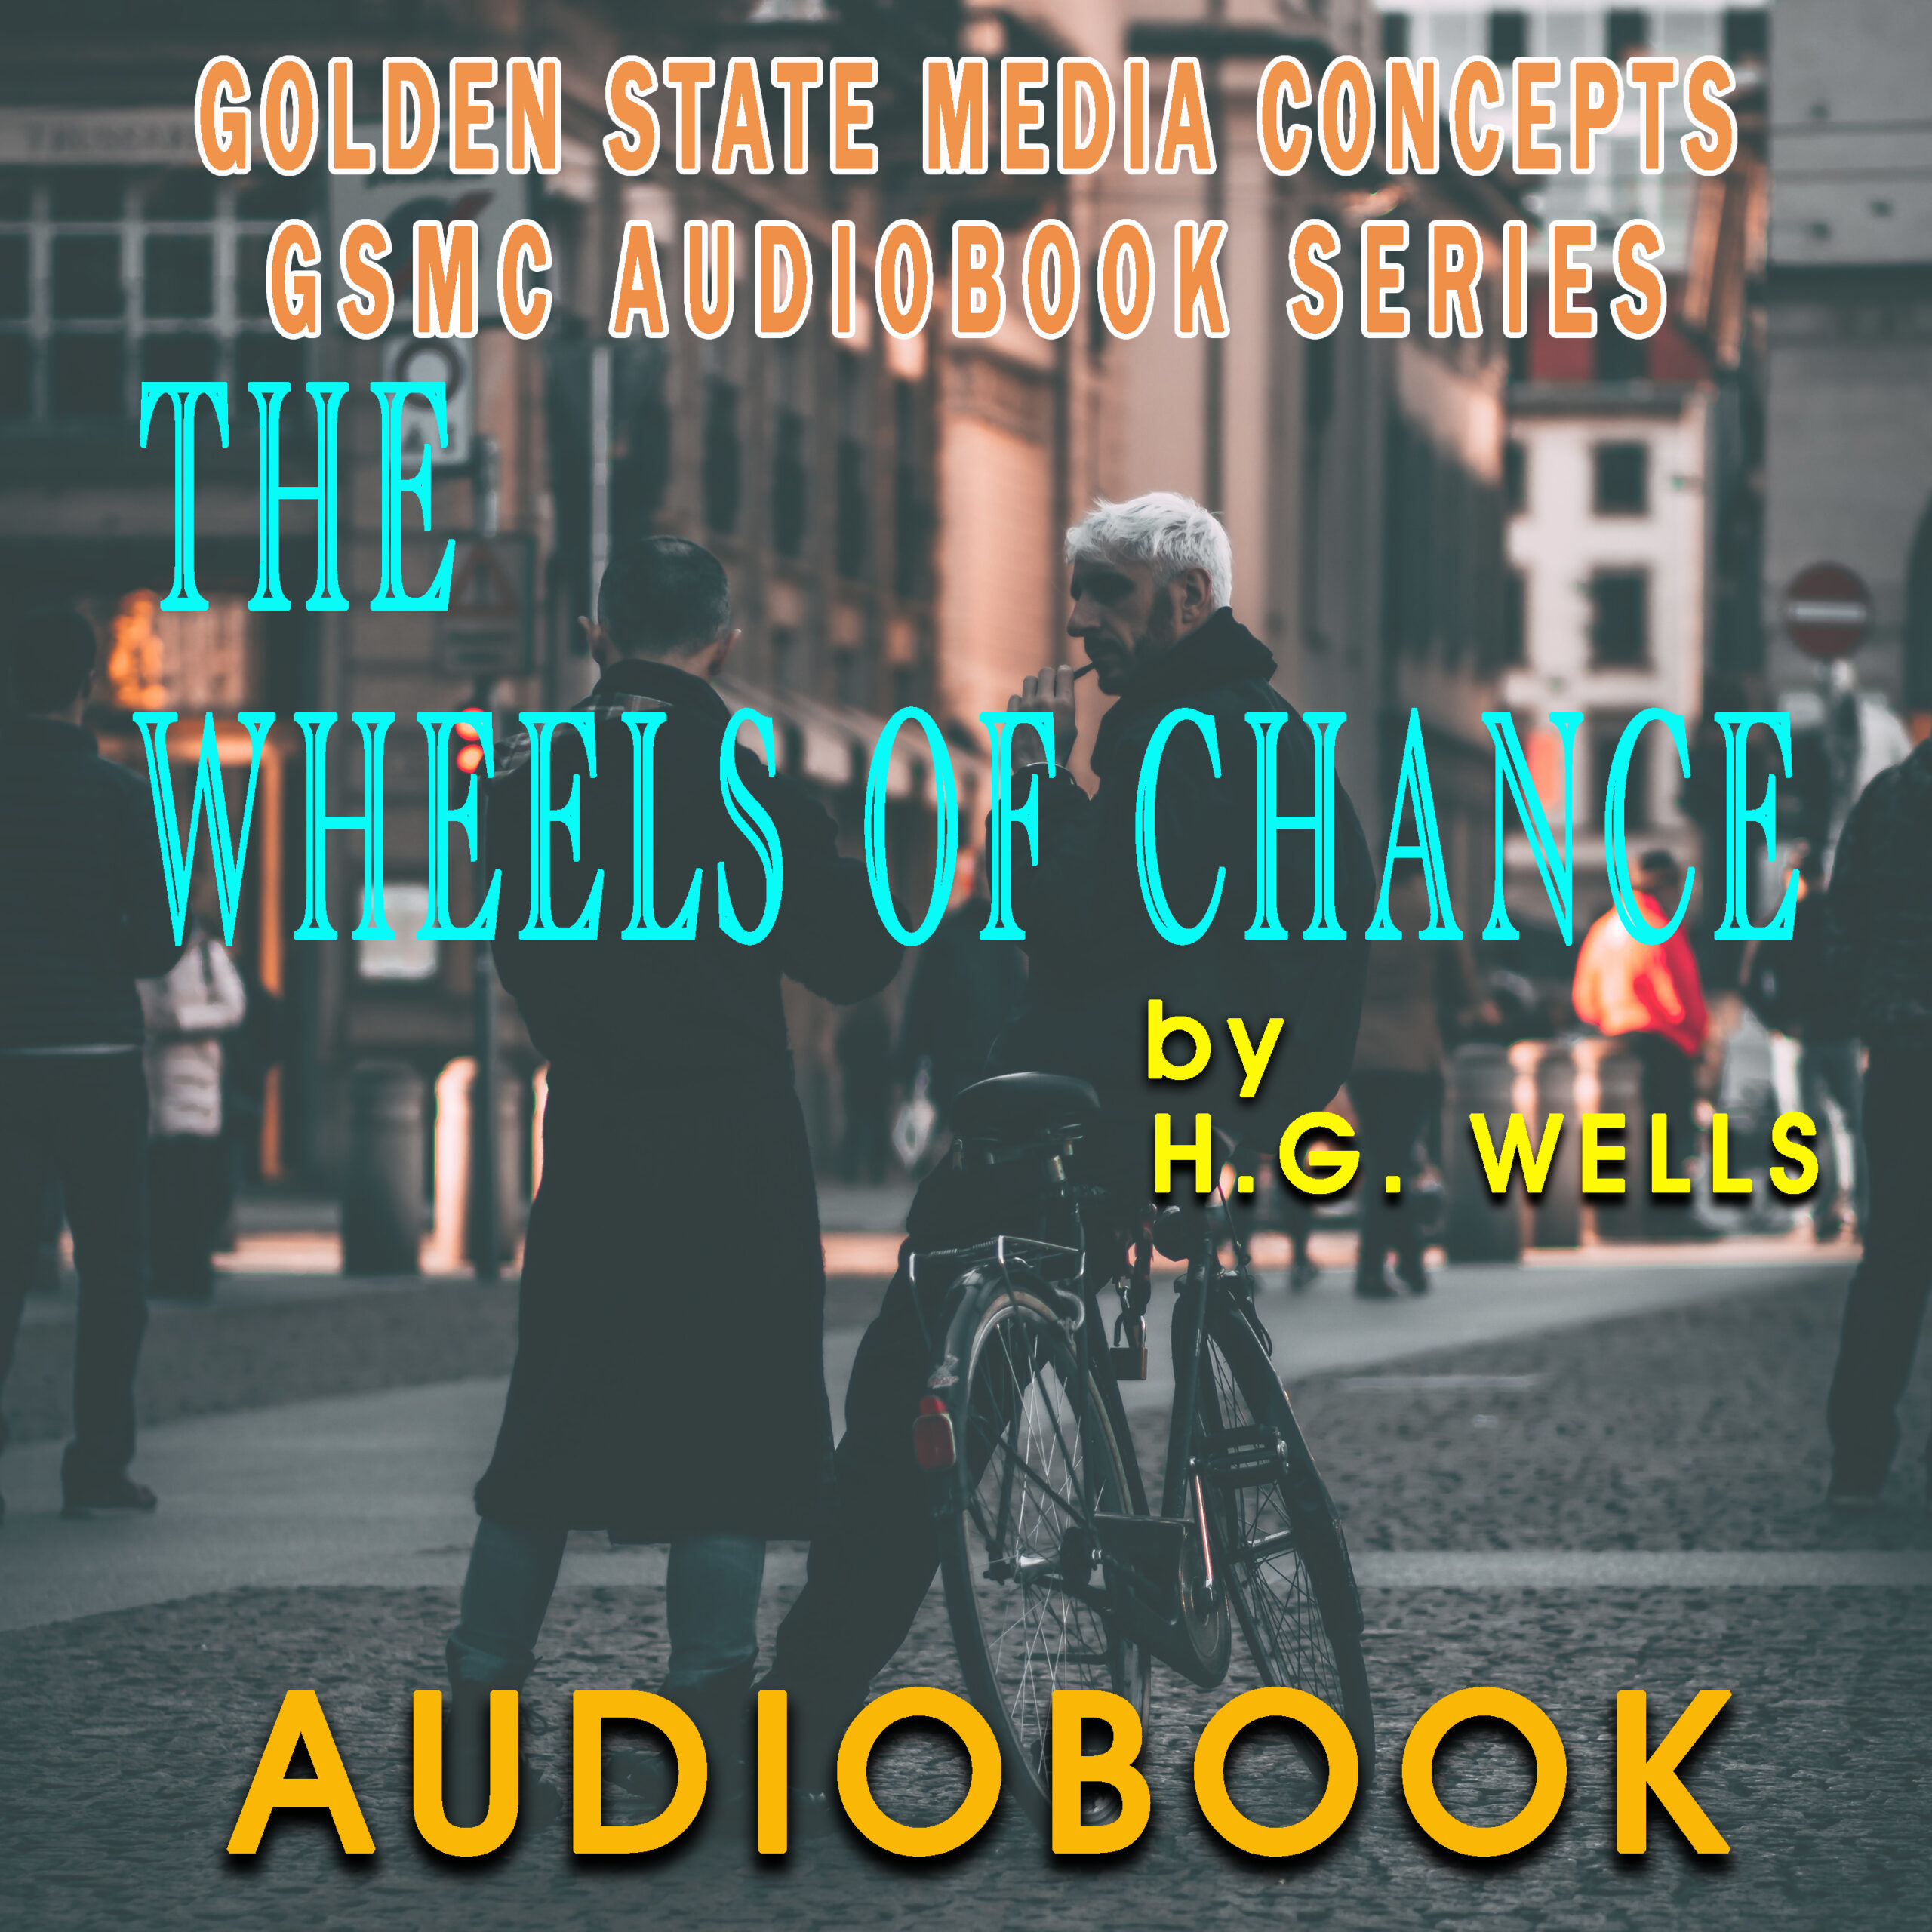 GSMC Audiobook Series: The Wheels of Chance by H.G. Wells